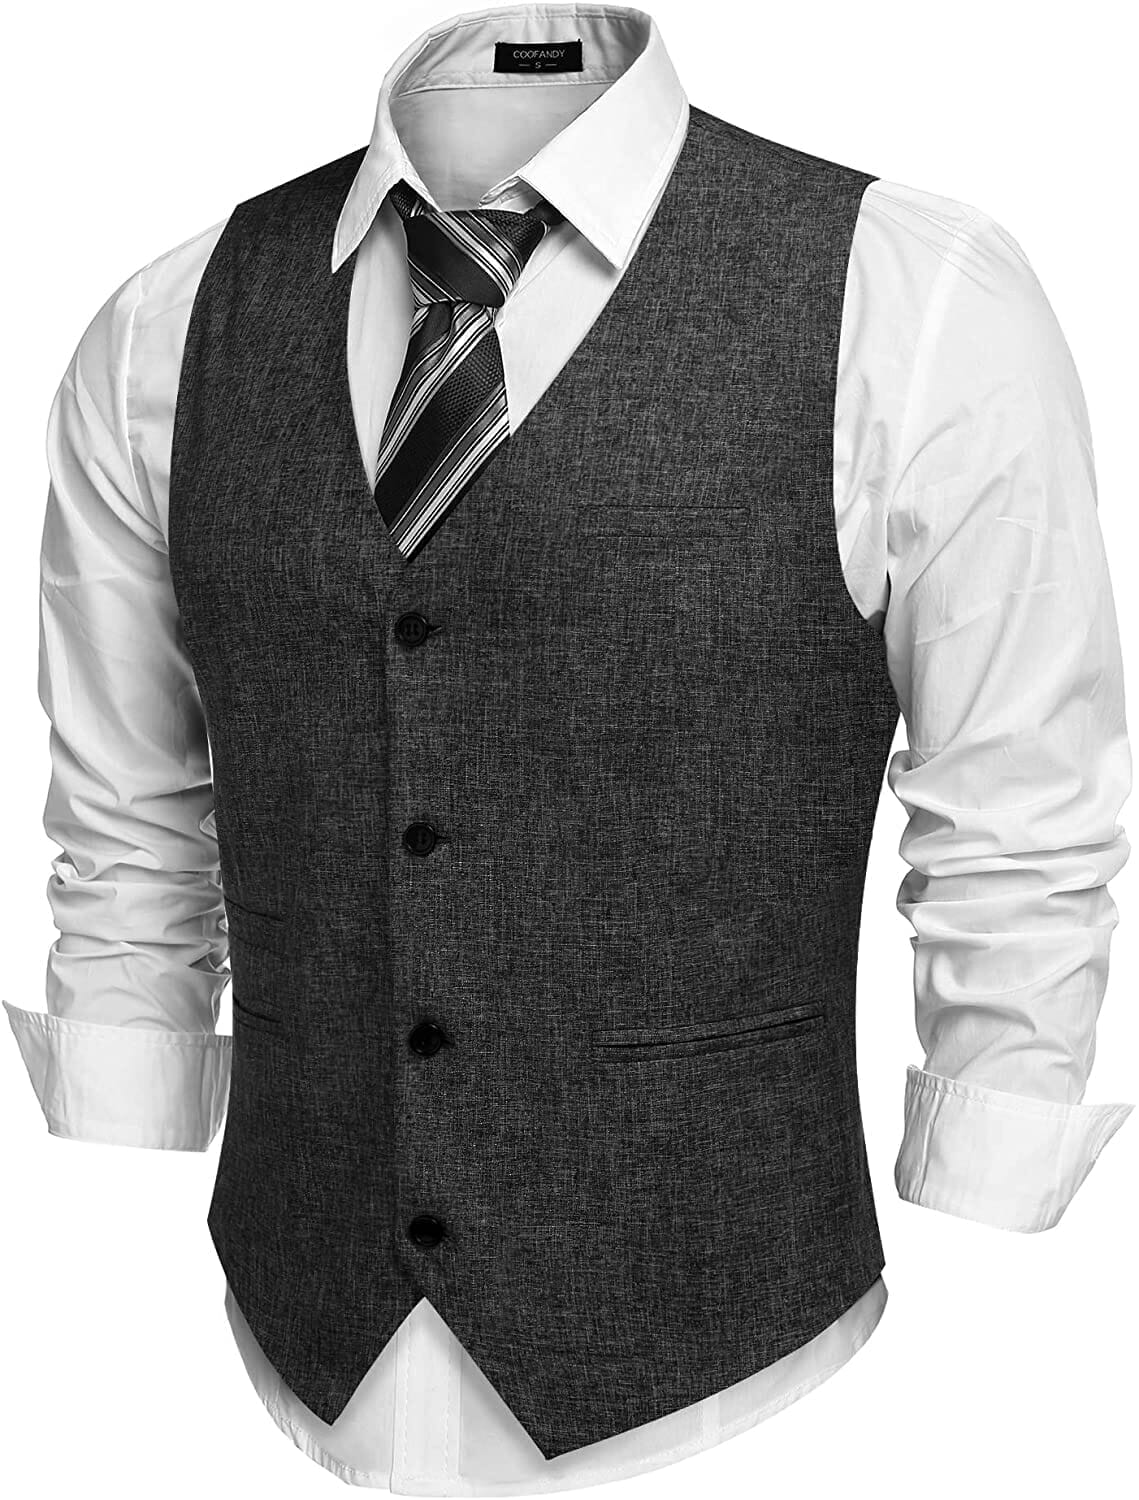 COOFANDY - Waistcoat Business Vests (US Only)